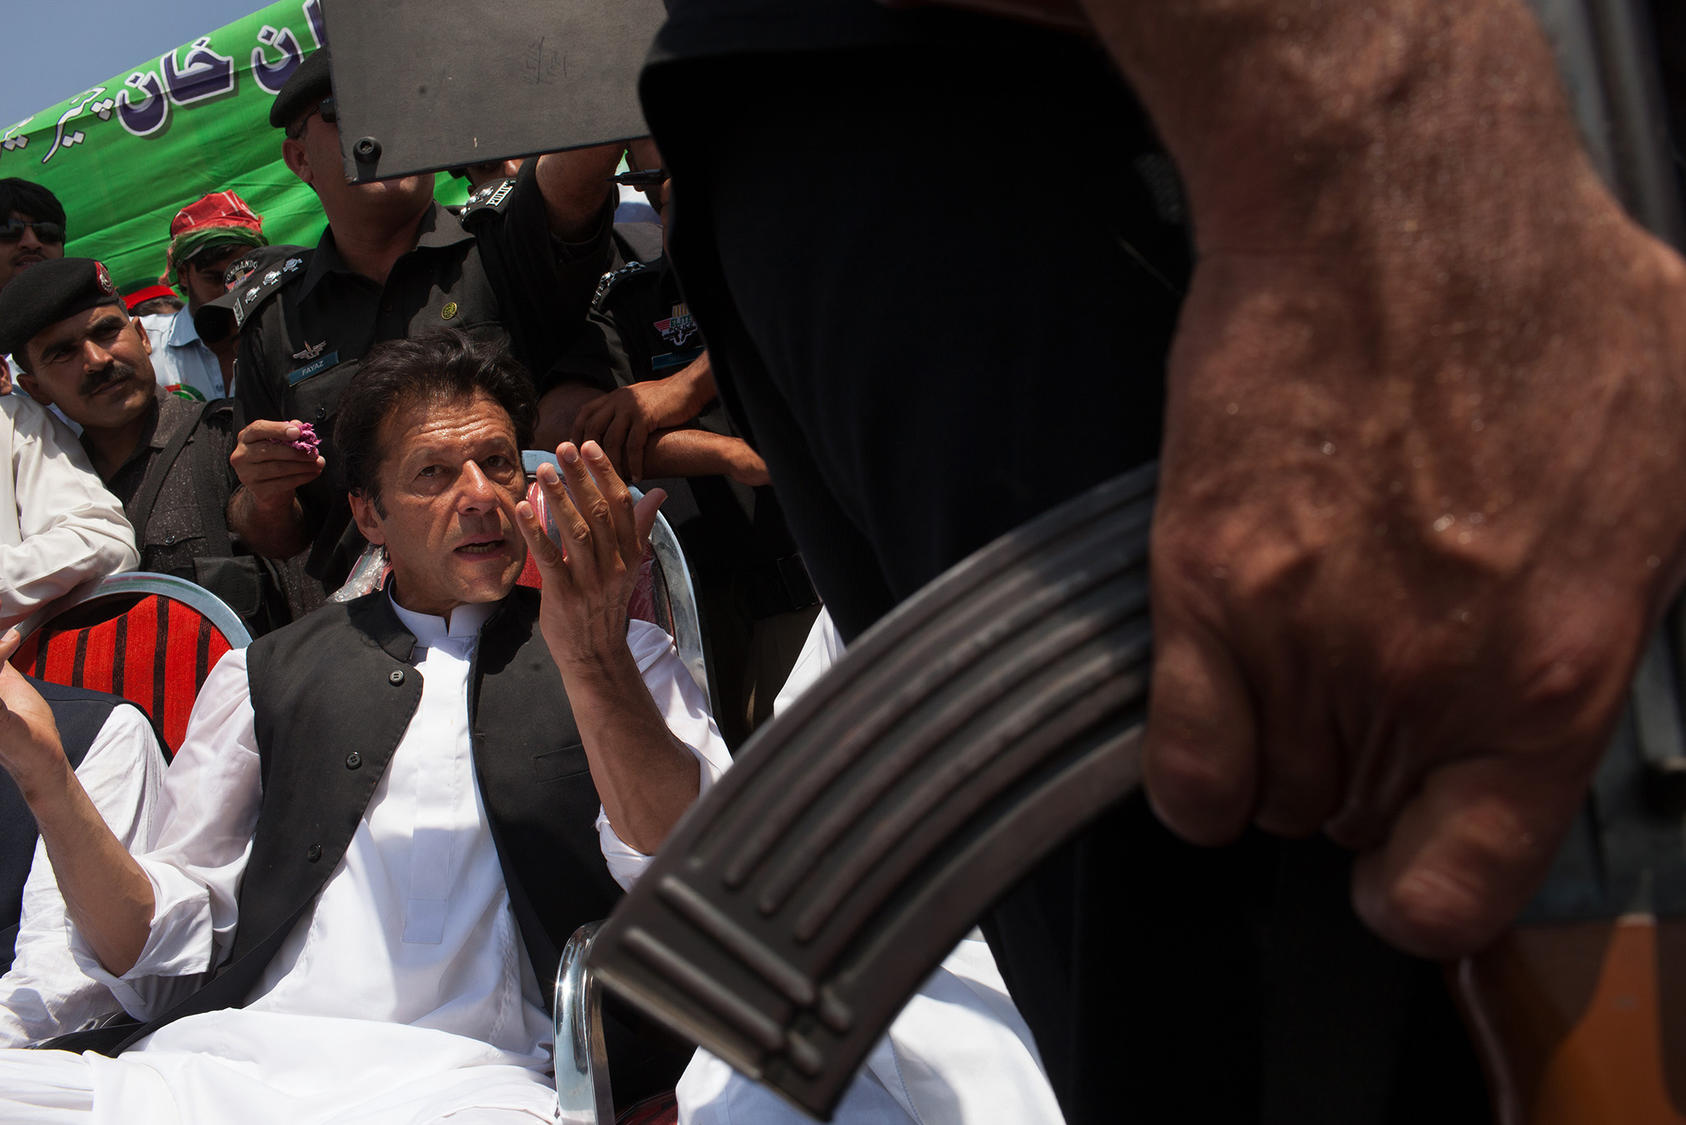 Prime Minister Imran Khan during a campaign rally for Pakistan's 2013 parliamentary elections in the Swabi District of Pakistan. (Tyler Hicks/The New York Times)